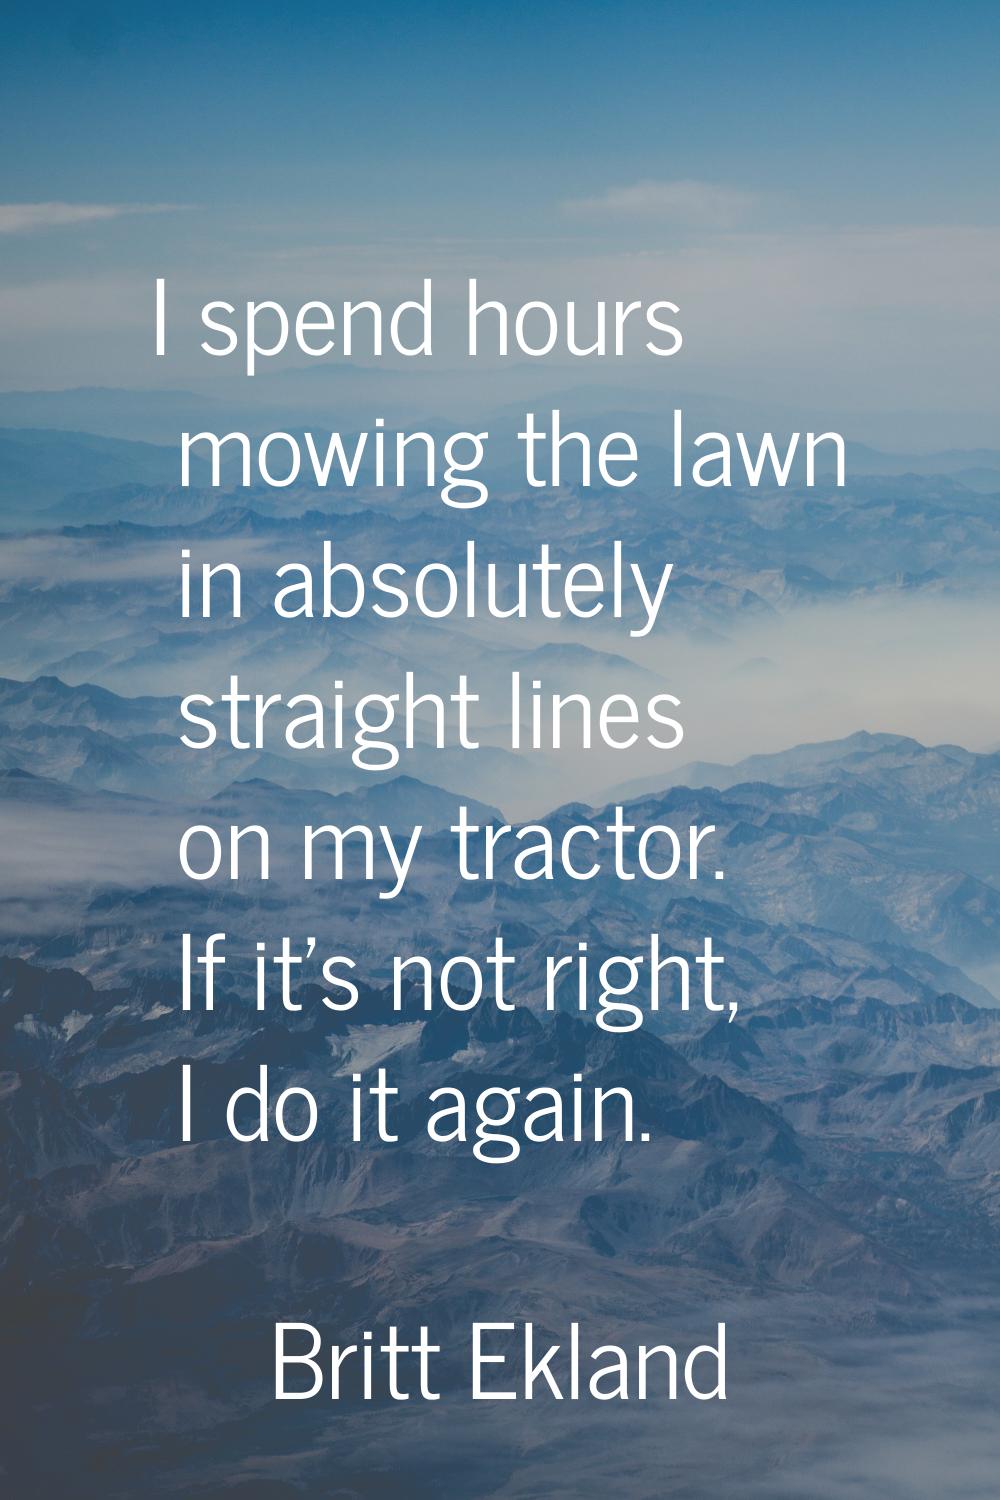 I spend hours mowing the lawn in absolutely straight lines on my tractor. If it's not right, I do i